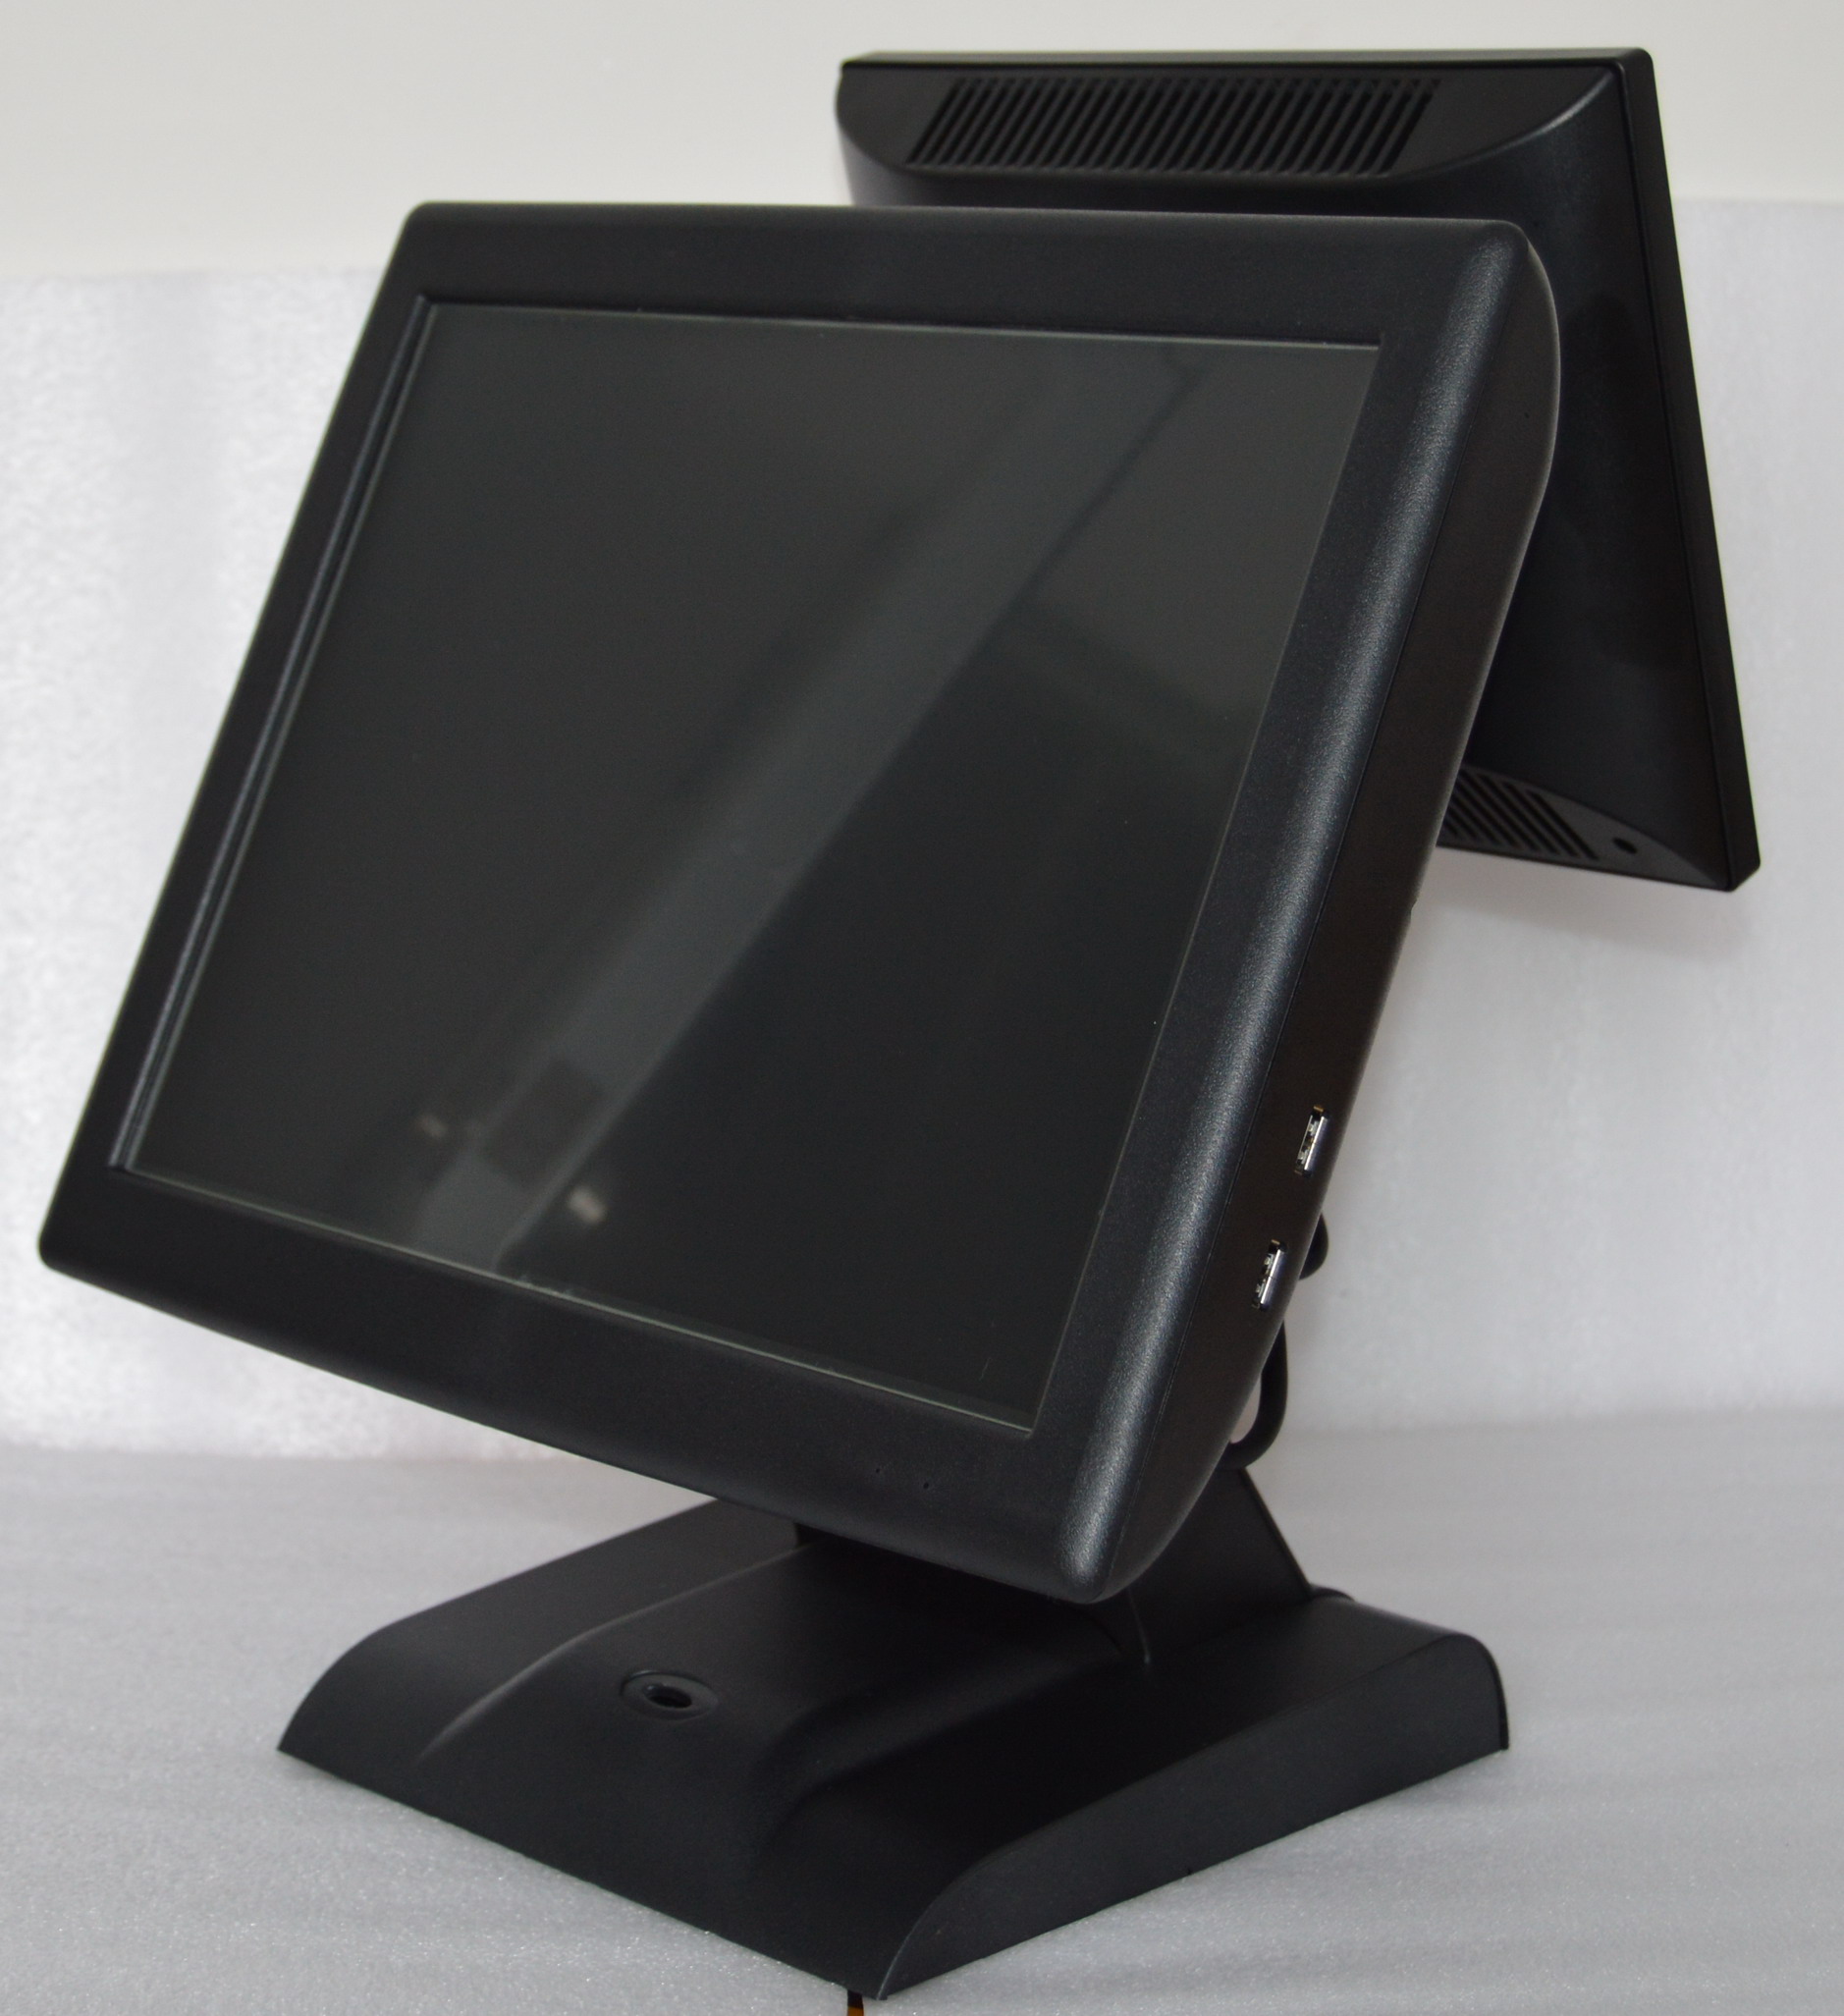 2016 restaurant 15 inch all in one pos contact terminal